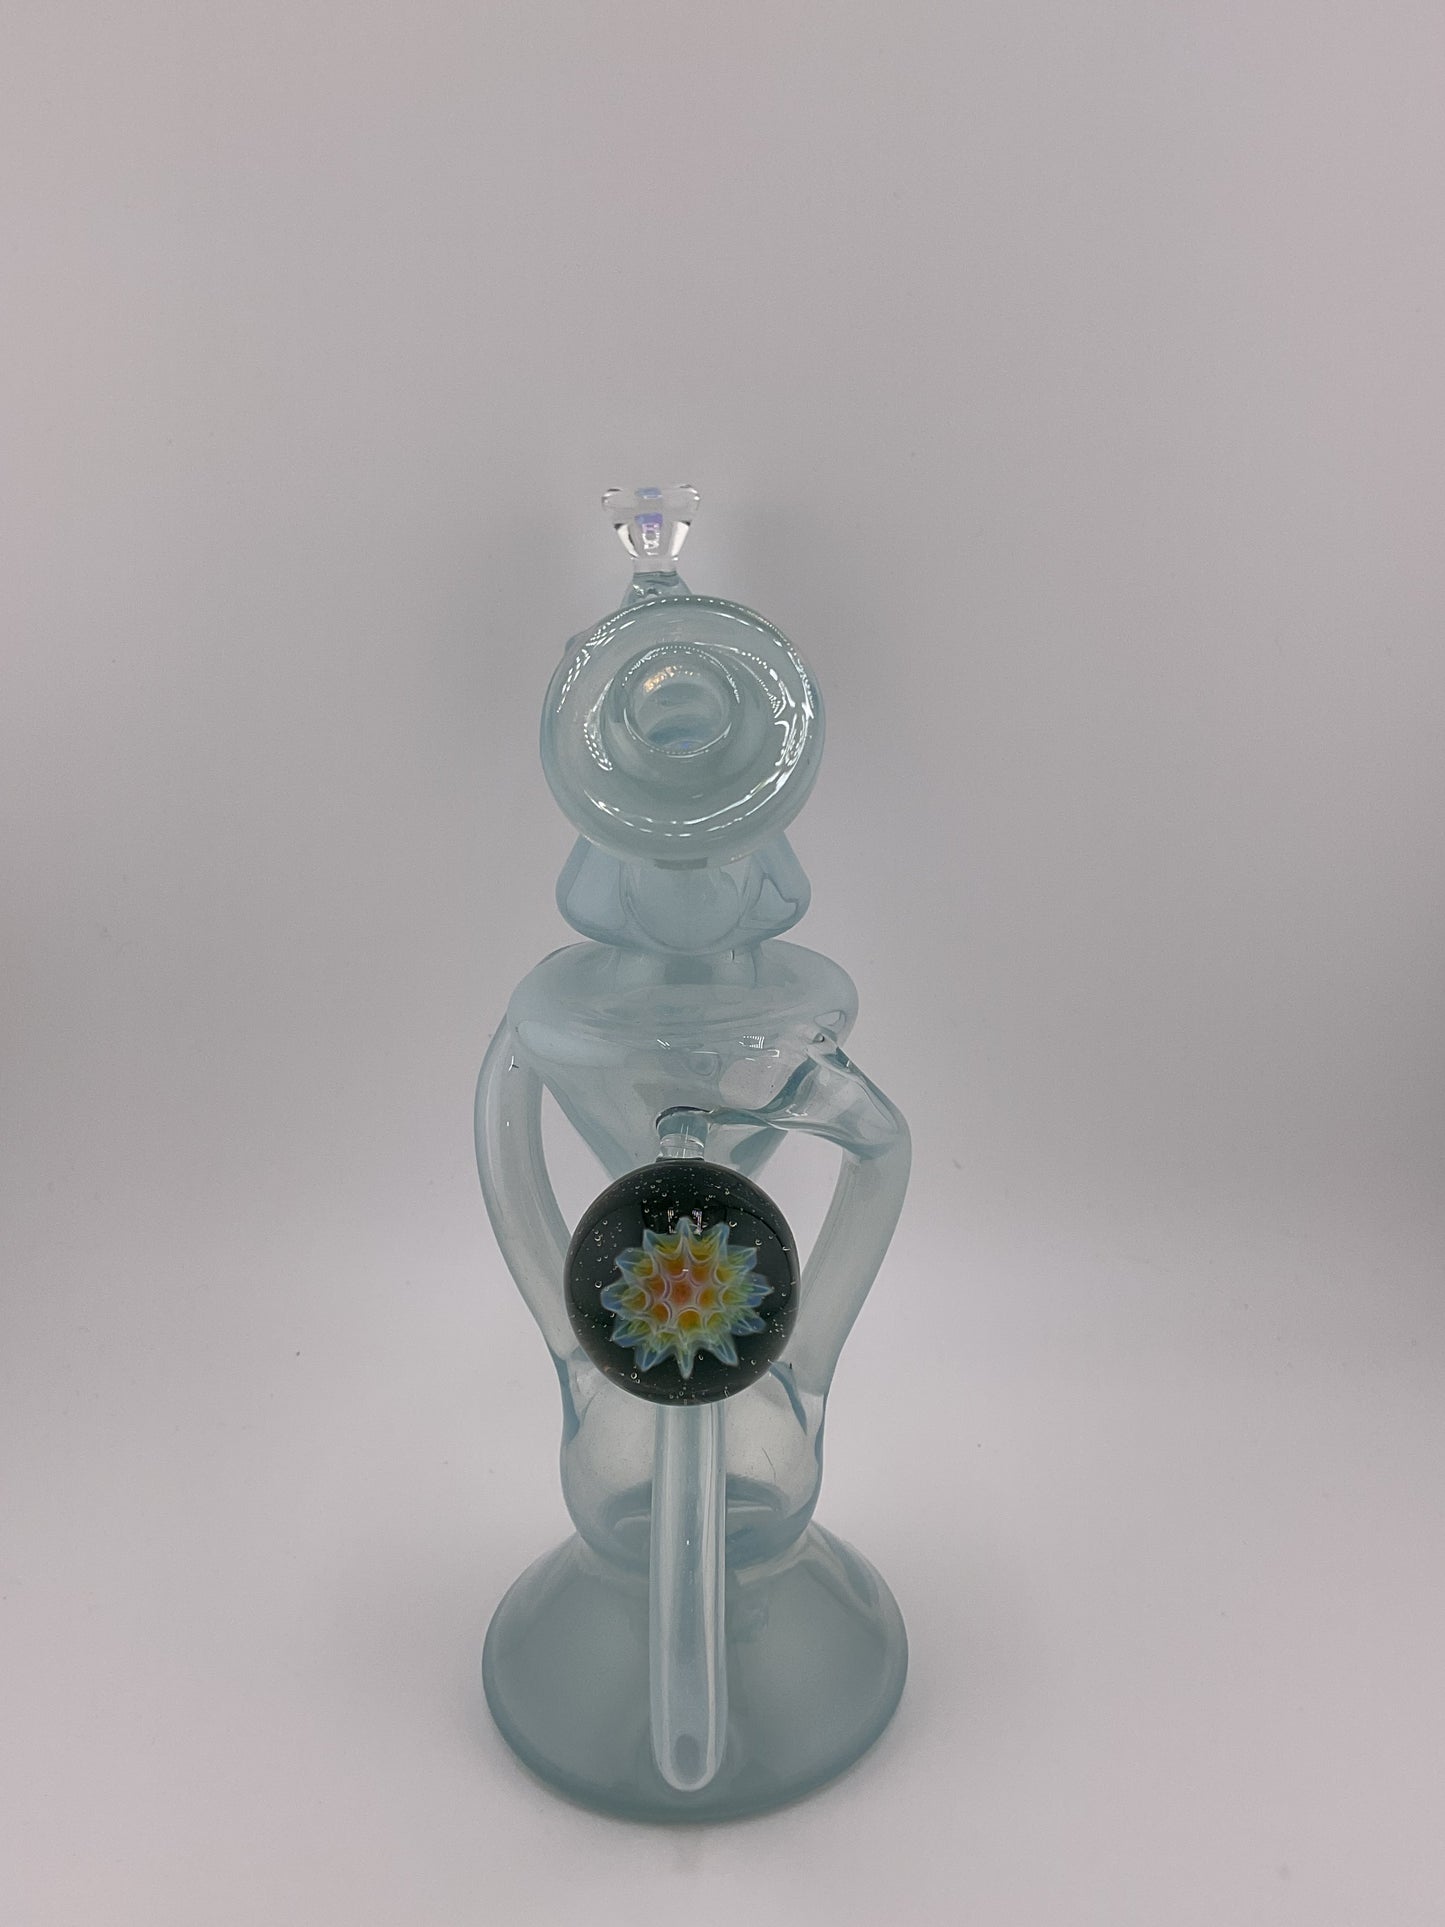 Made by Mank Heady Recycler